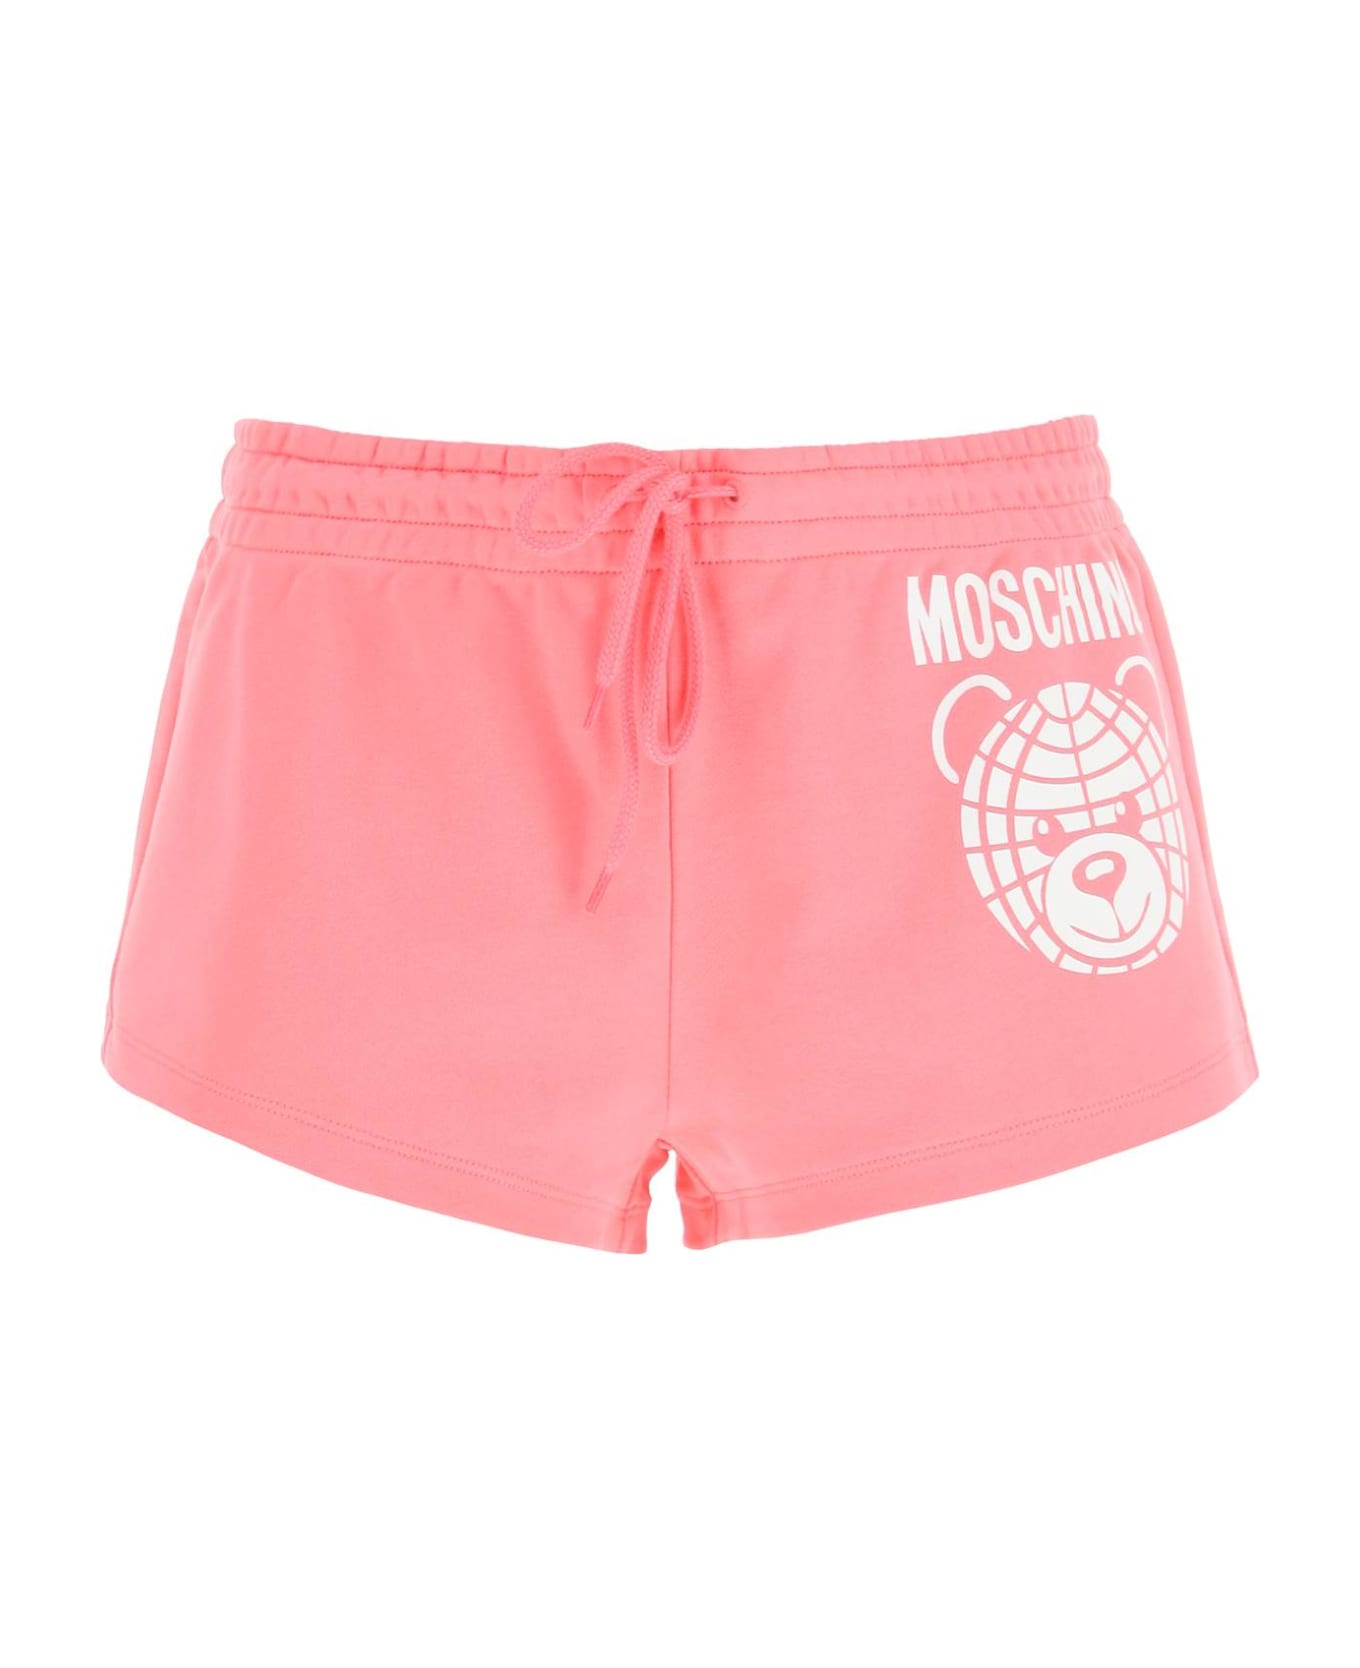 Moschino Sporty Shorts With Teddy Print - FANTASIA FUXIA (Pink) ショートパンツ